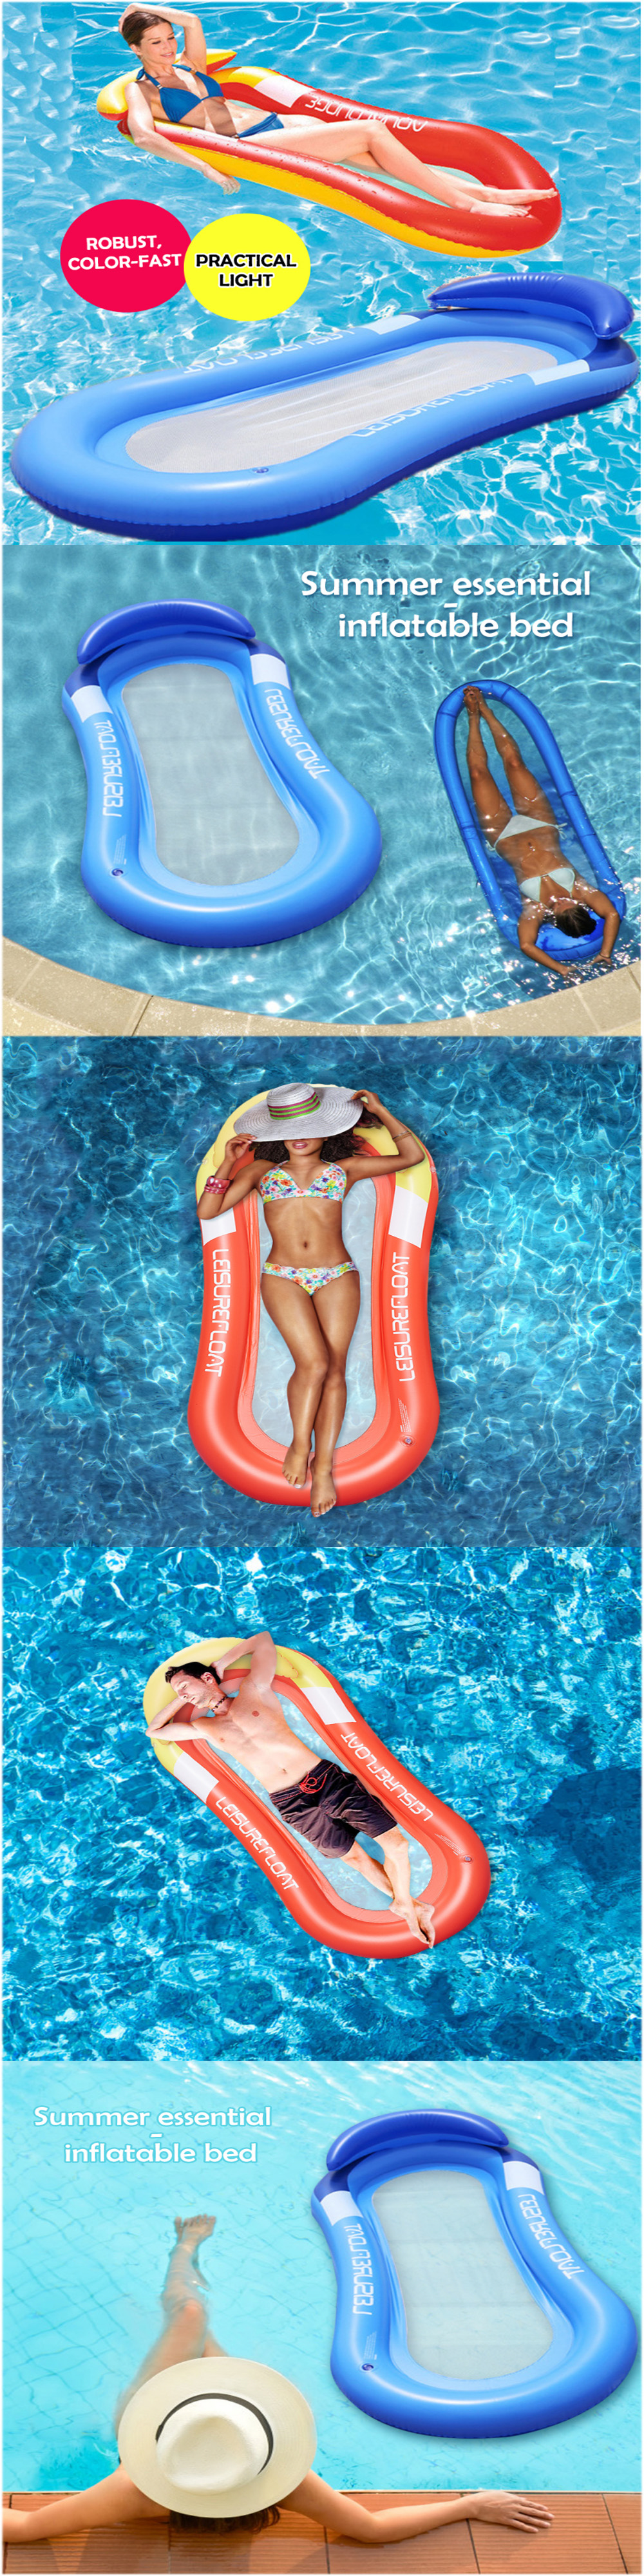 160CM-Inflatable-Float-Water-Hammock-Swim-Lounge-Chair-Floating-Bed-Giant-Beach-Pool-Mat-Interactive-1827314-1